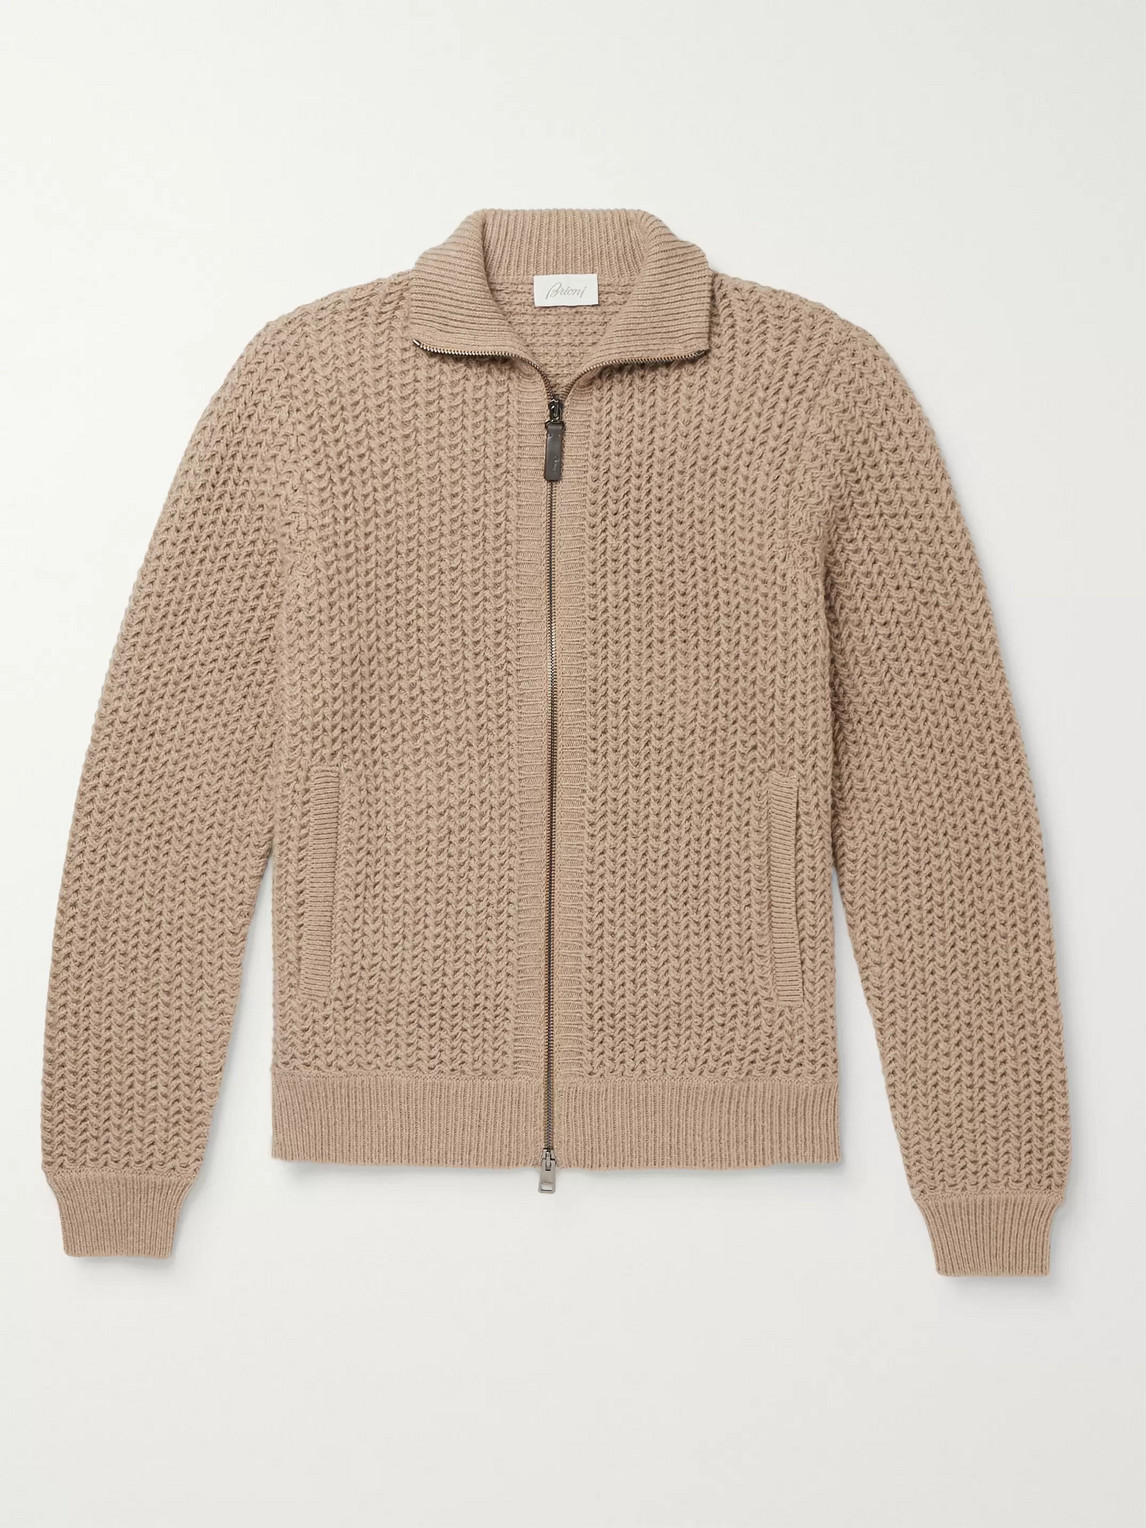 Brioni Textured Cashmere And Cotton-blend Zip-up Cardigan In Brown